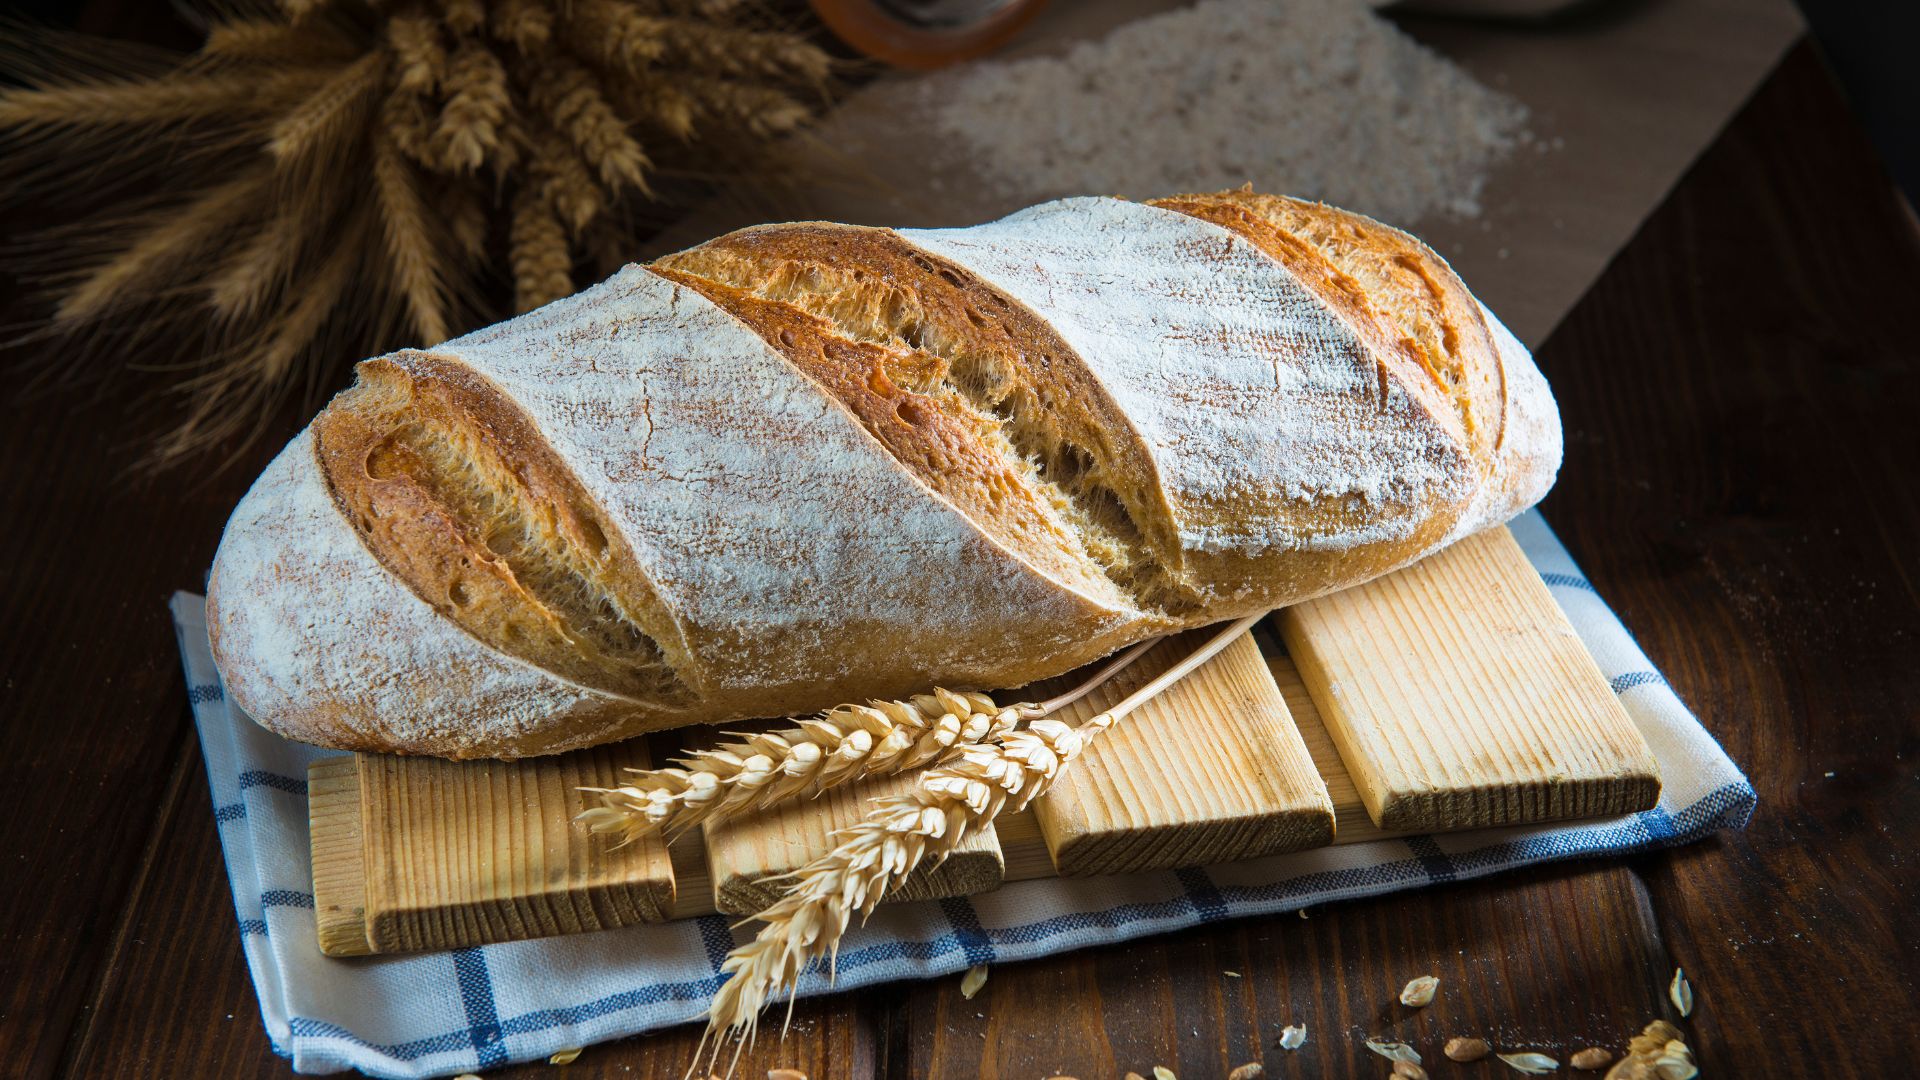 8 Reasons Why Switching To Sourdough Bread Could Revolutionalize Your Health!